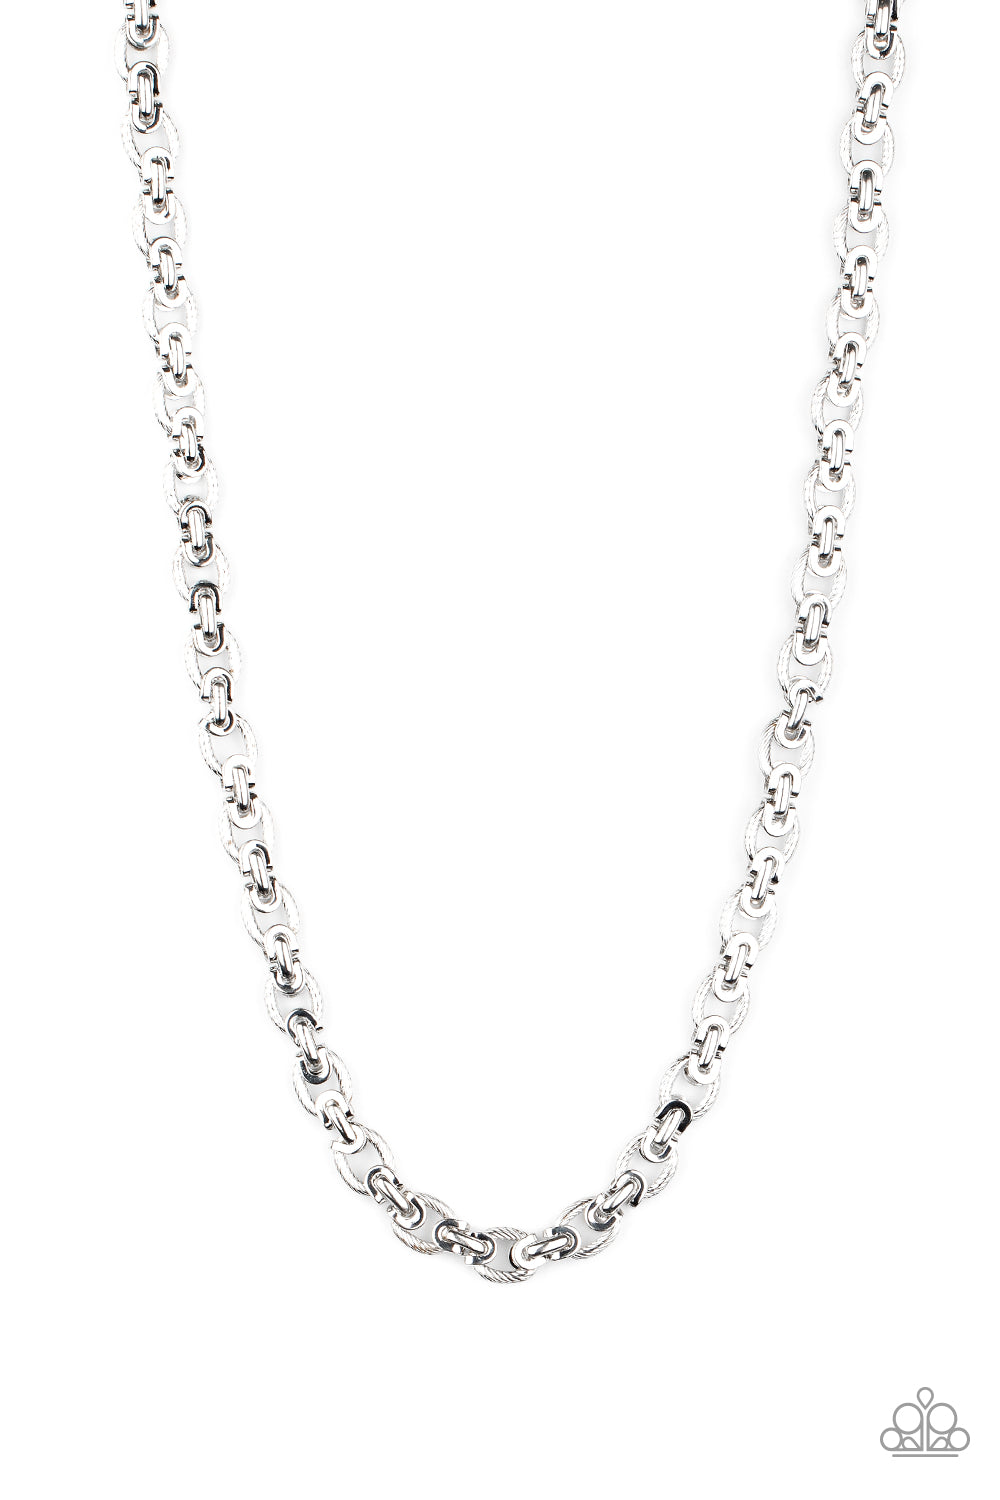 Paparazzi Necklace ~ Grit and Gridiron - Silver